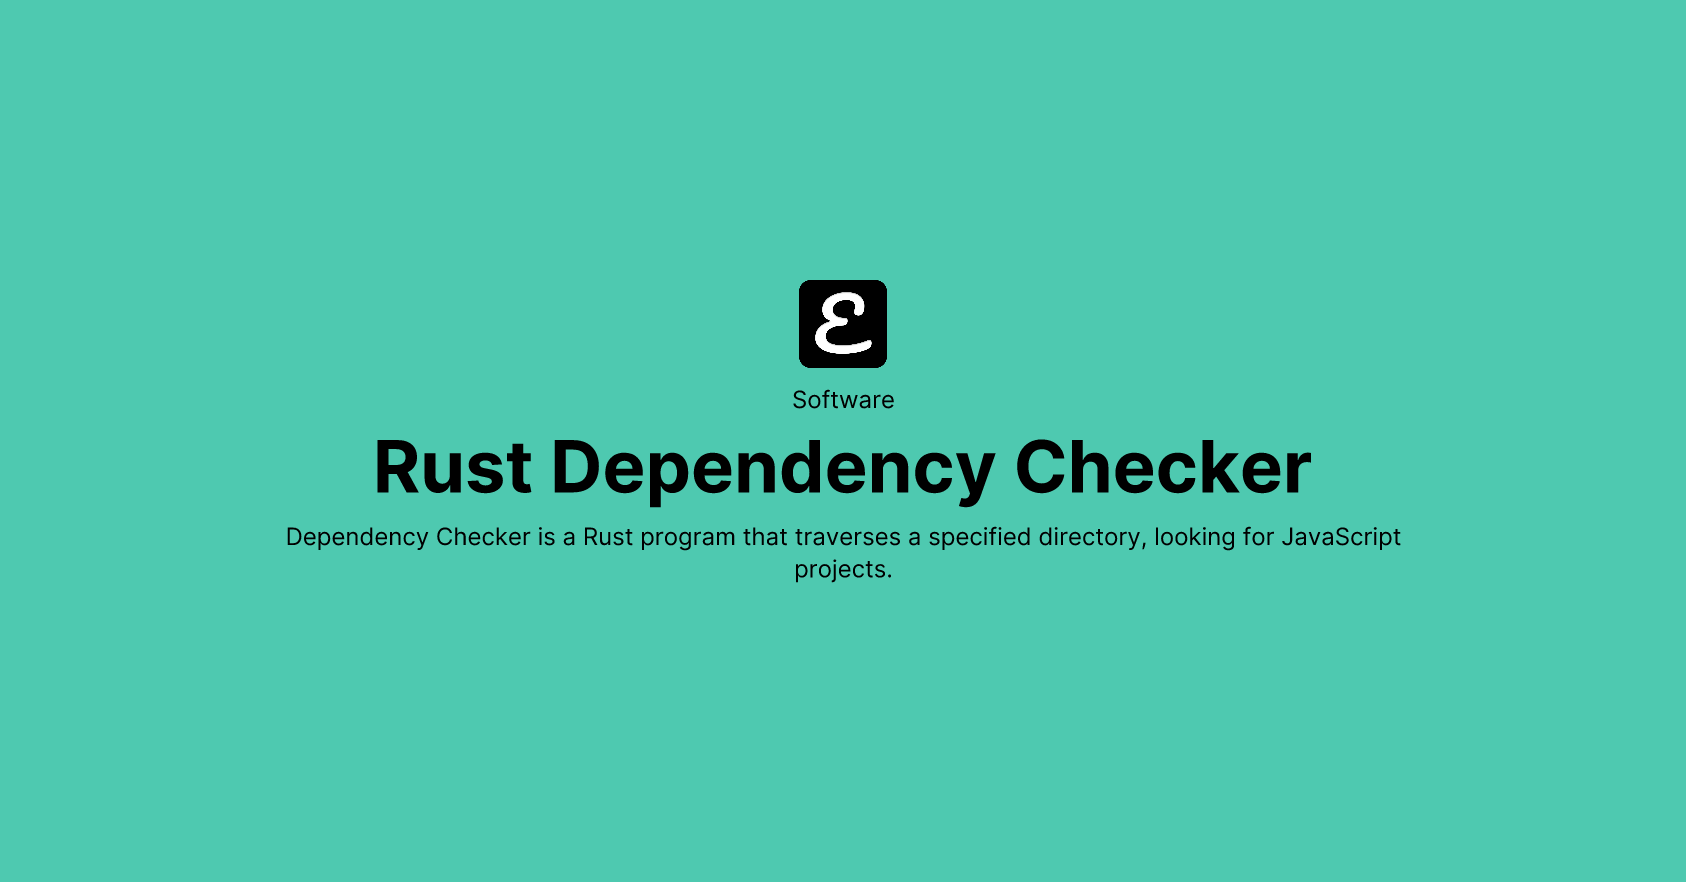 Rust Dependency Checker by Eric David Smith